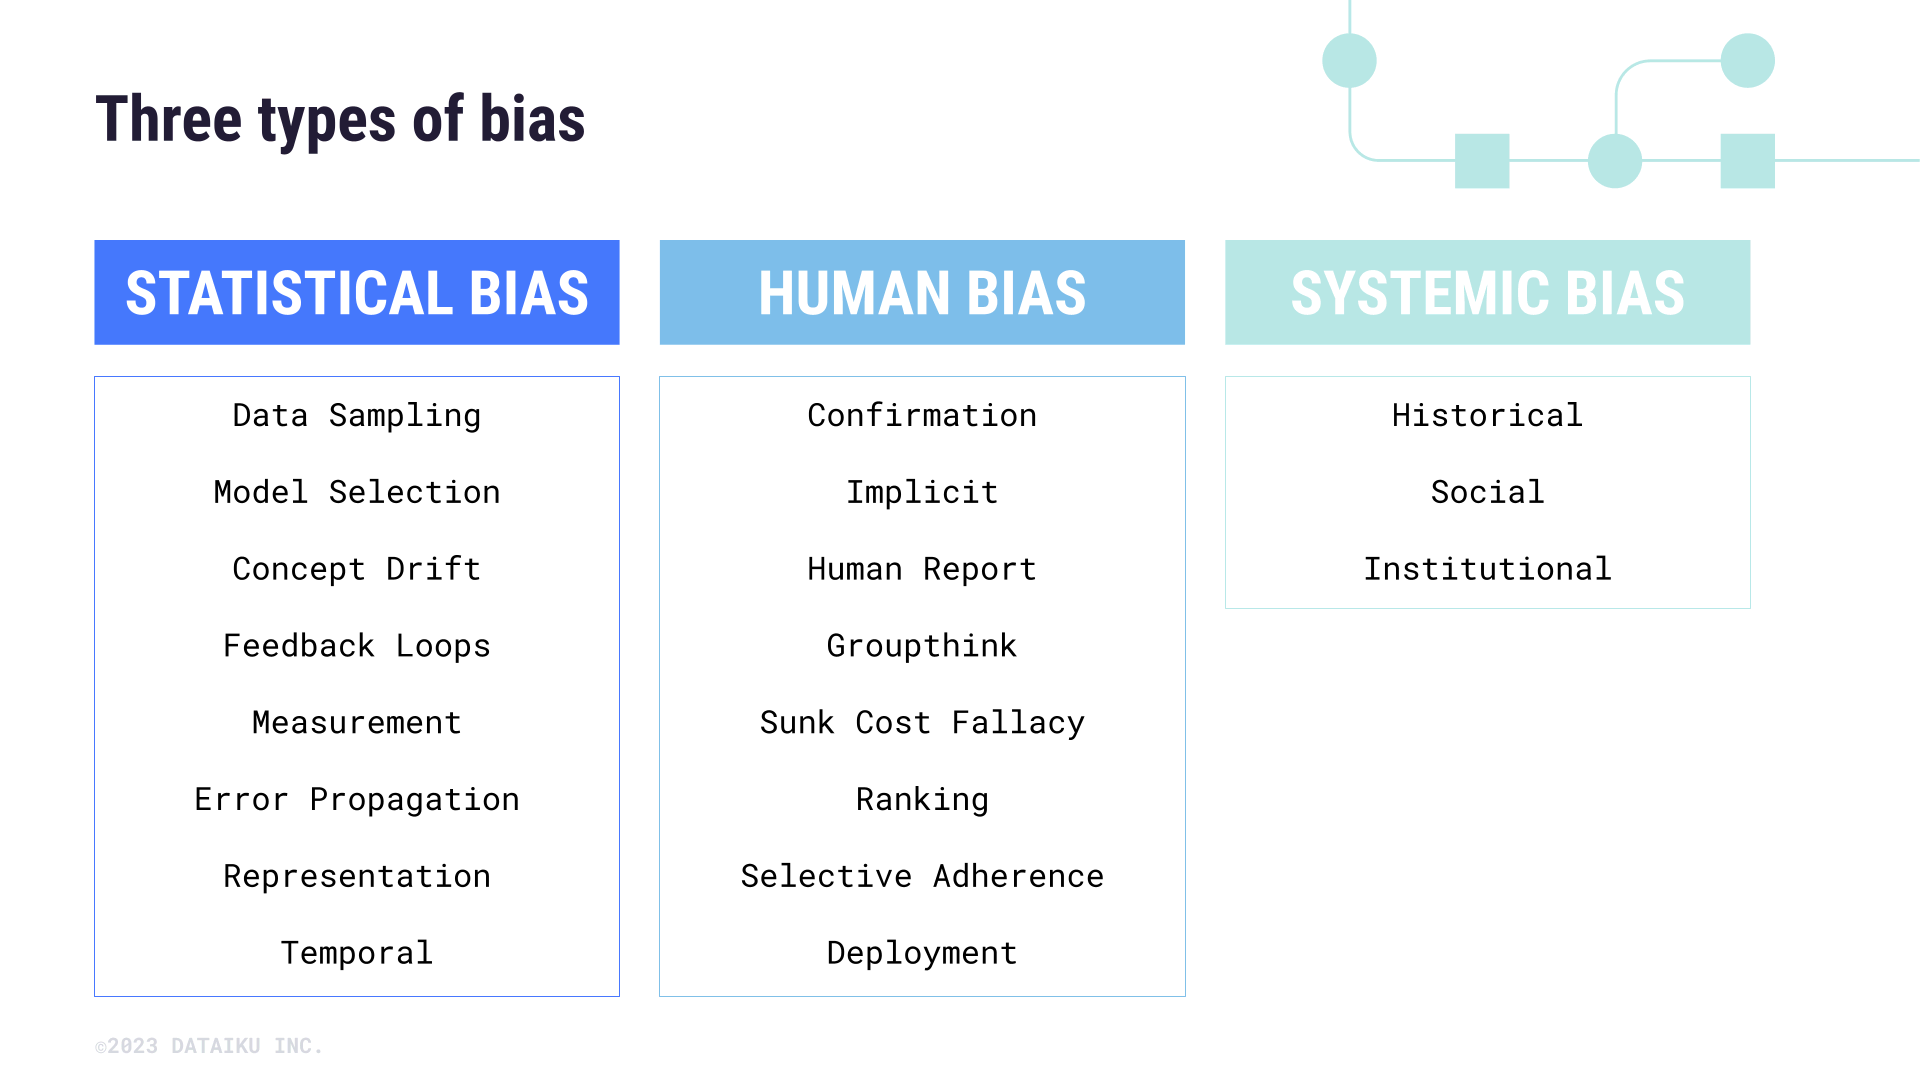 Three types of bias that can occur in machine learning.